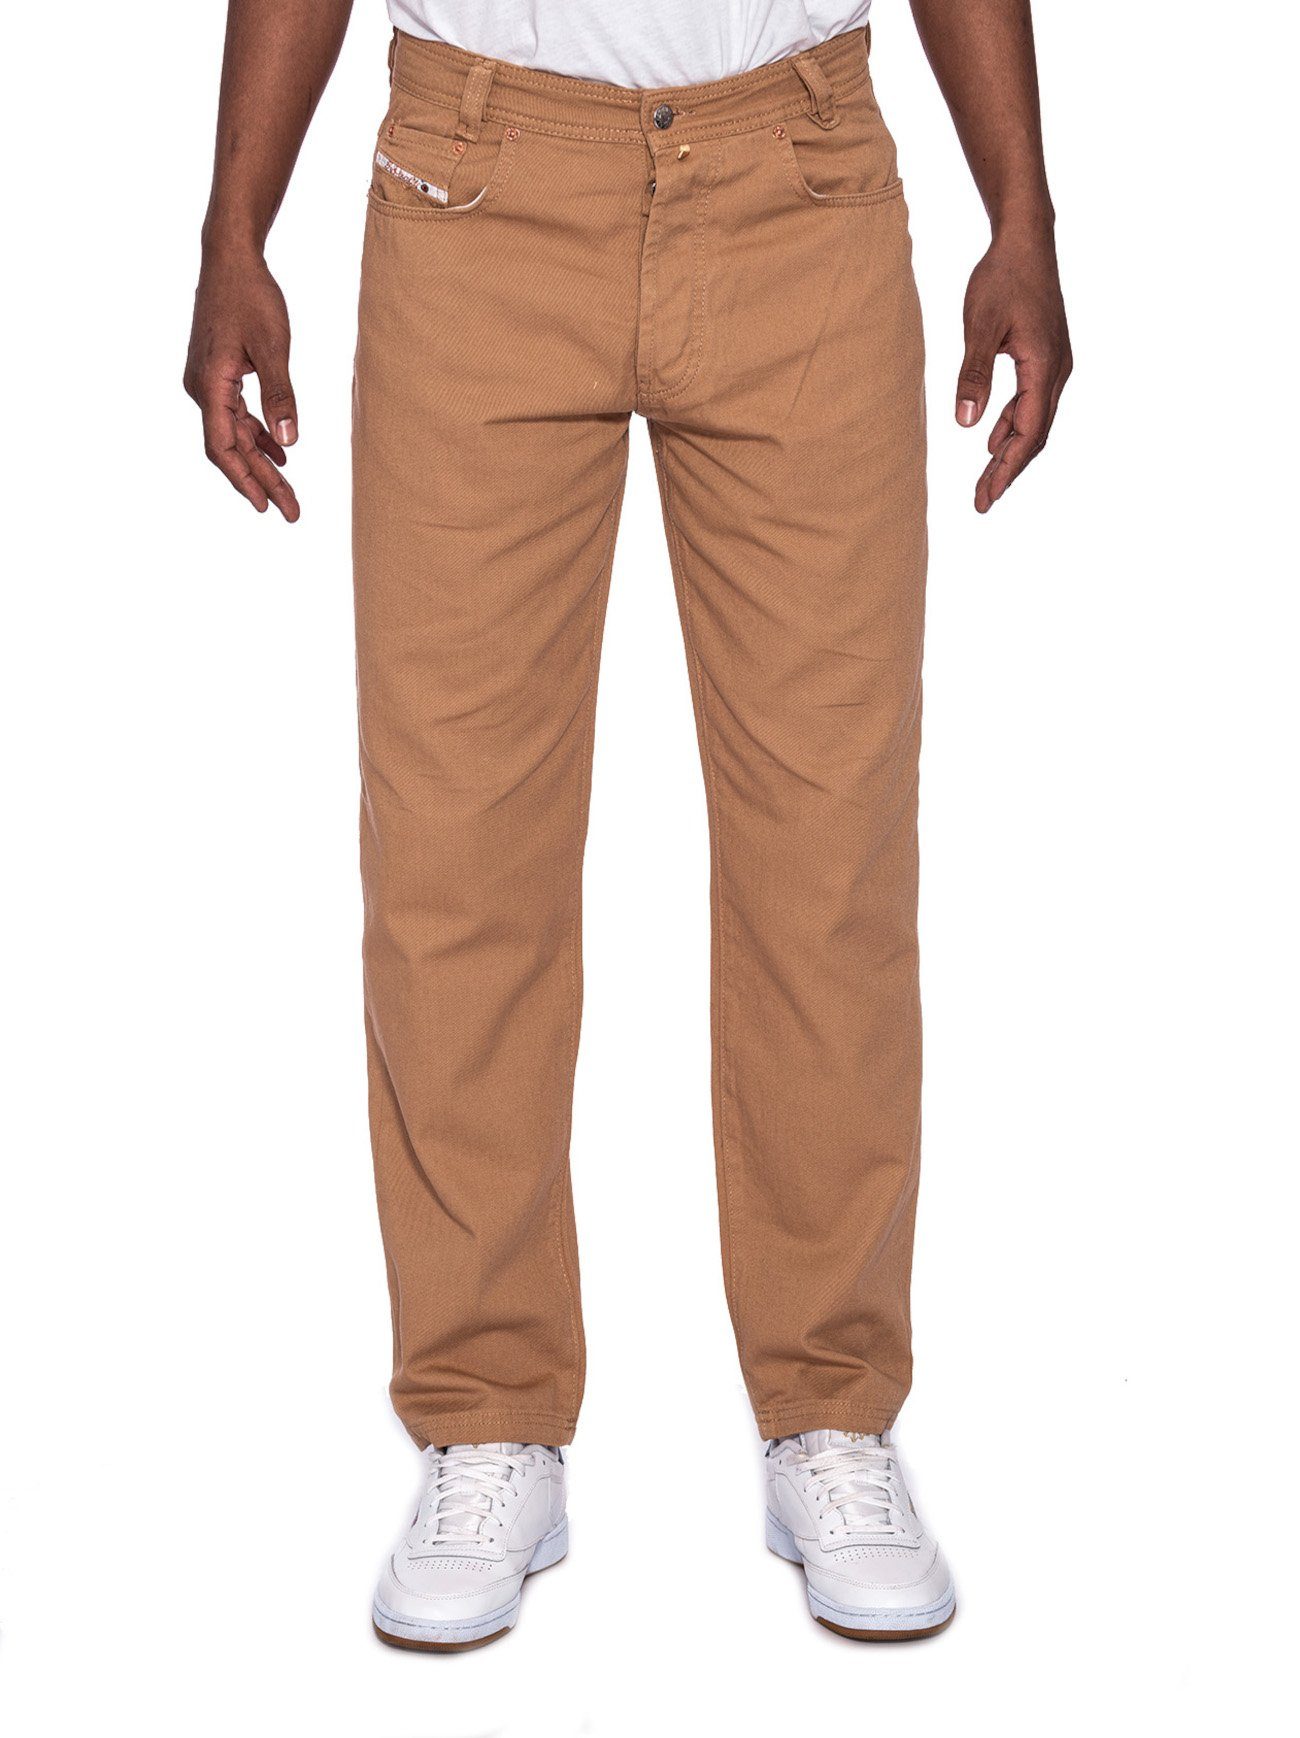 PICALDI Jeans Zicco Sommerhose, Tapered-fit-Jeans Loose Fit, Gabardine Relaxed Fit, Freizeithose 472 Camel